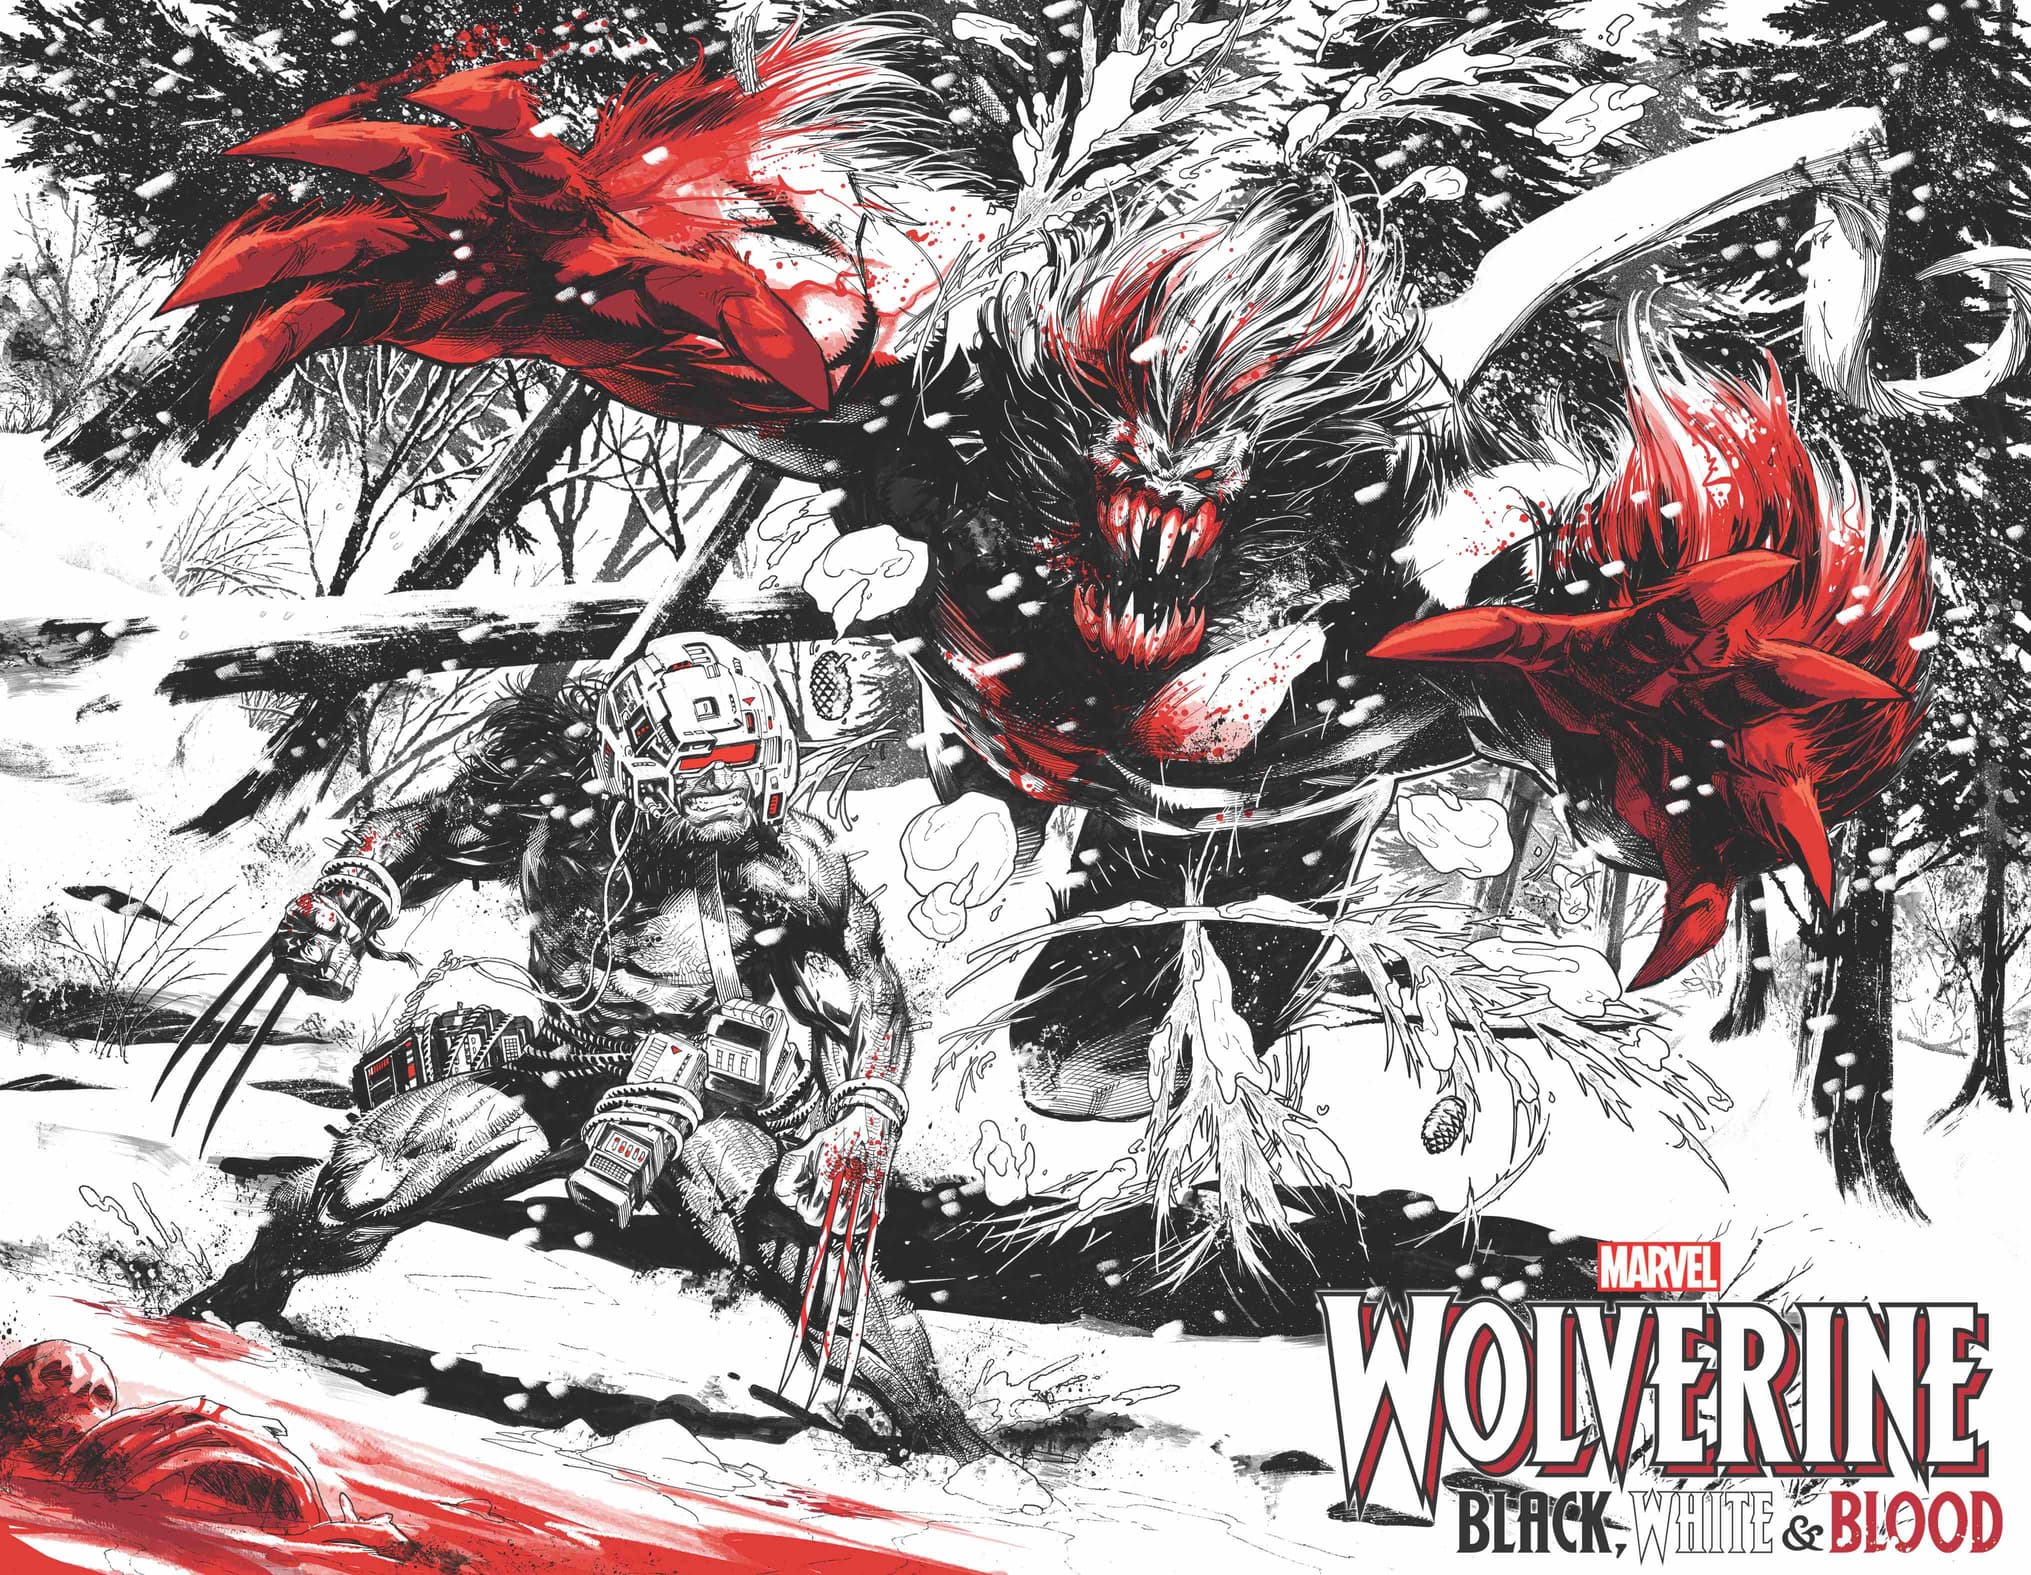 WOLVERINE: BLACK, WHITE & BLOOD #1 preview interiors by Adam Kubert and Frank Martin